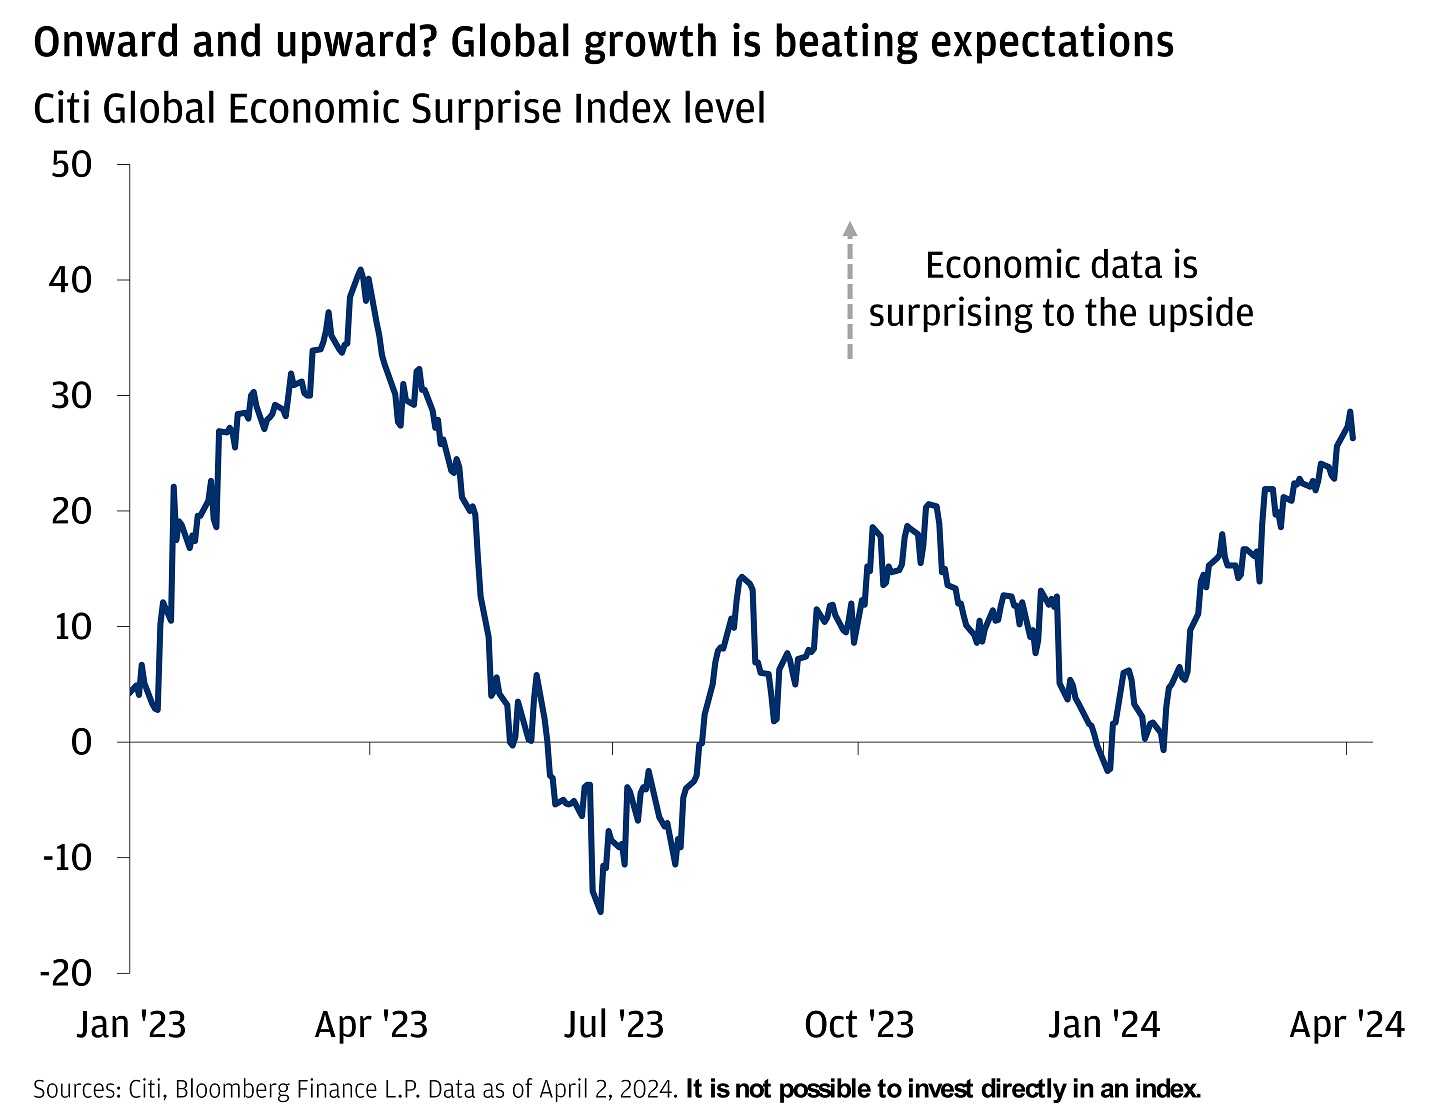 Line chart showing Citi Global Economic Surprise Index level from January 2023 through April of 2024.